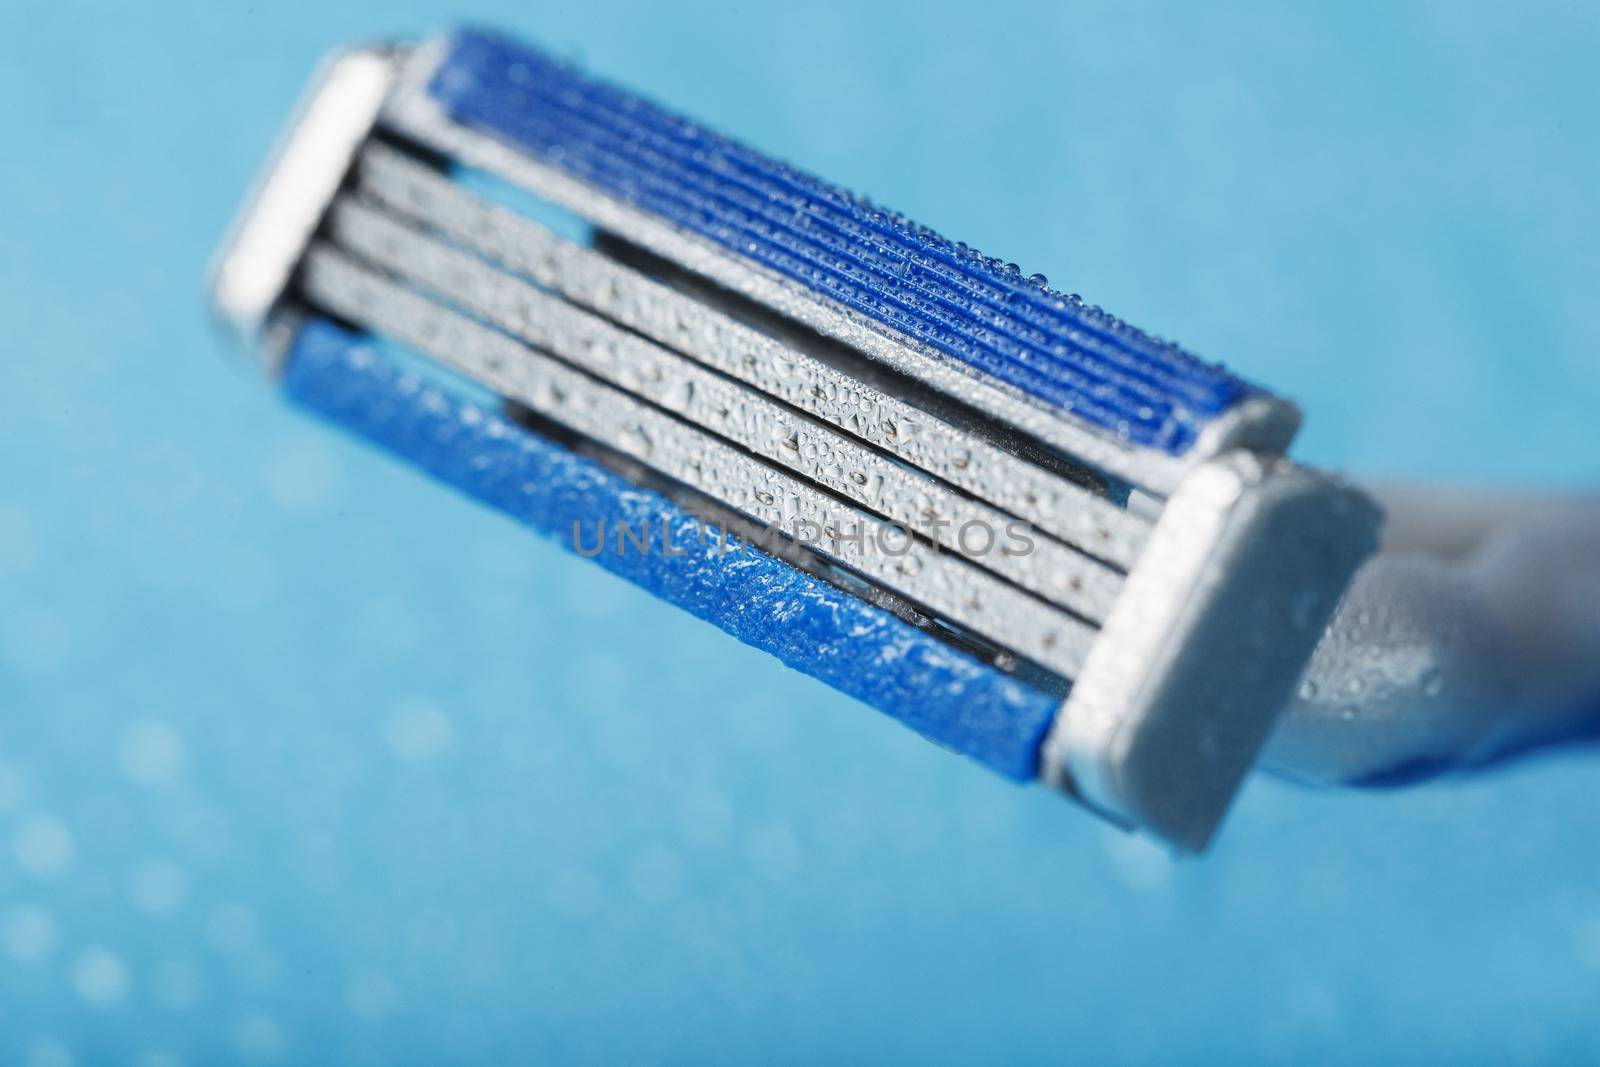 Shaving machine with three blades on a blue background with water drops in close-up by AlexGrec